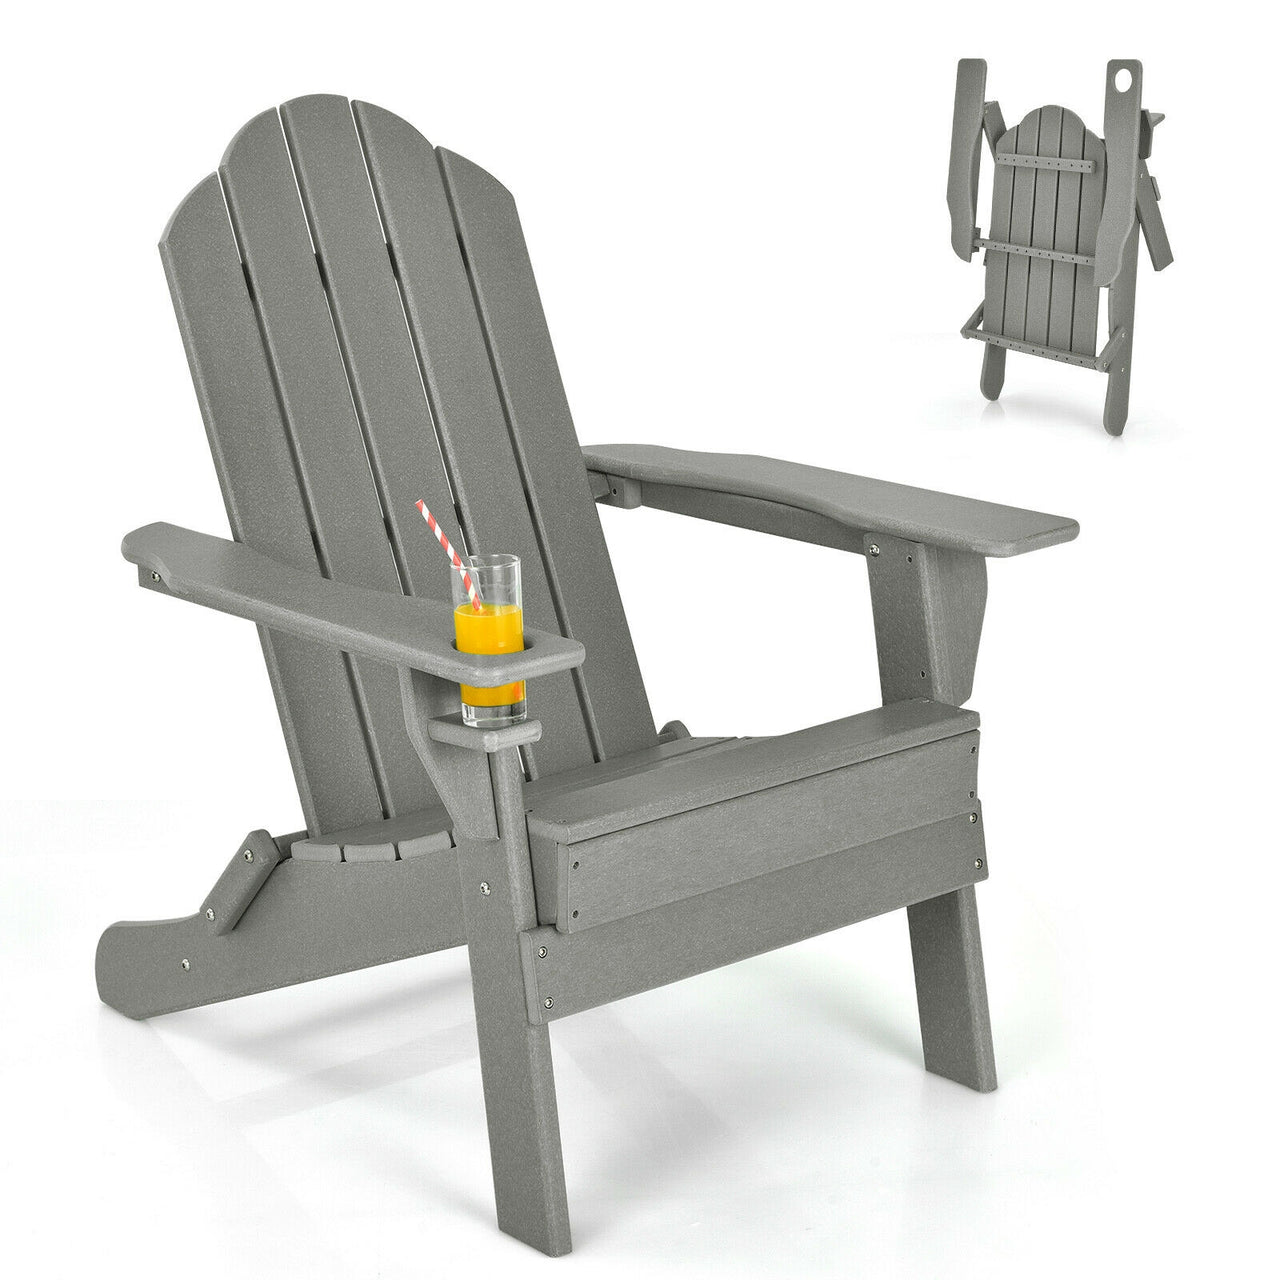 Foldable Weather Resistant Patio Chair with Built-in Cup Holder - Gallery View 4 of 10